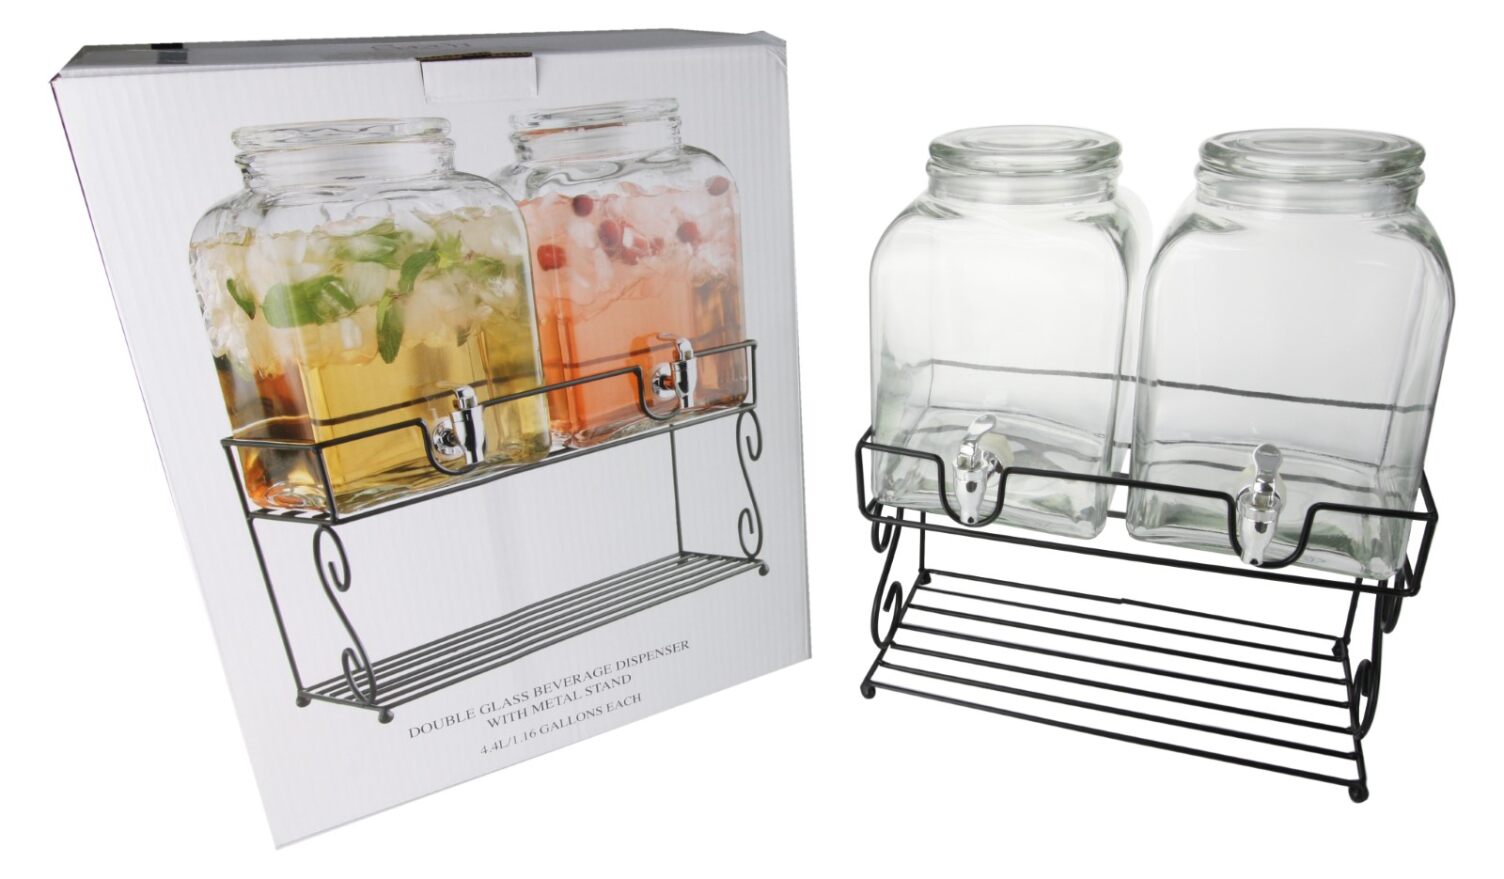 Cubed Double Glass Beverage Dispenser with Stand